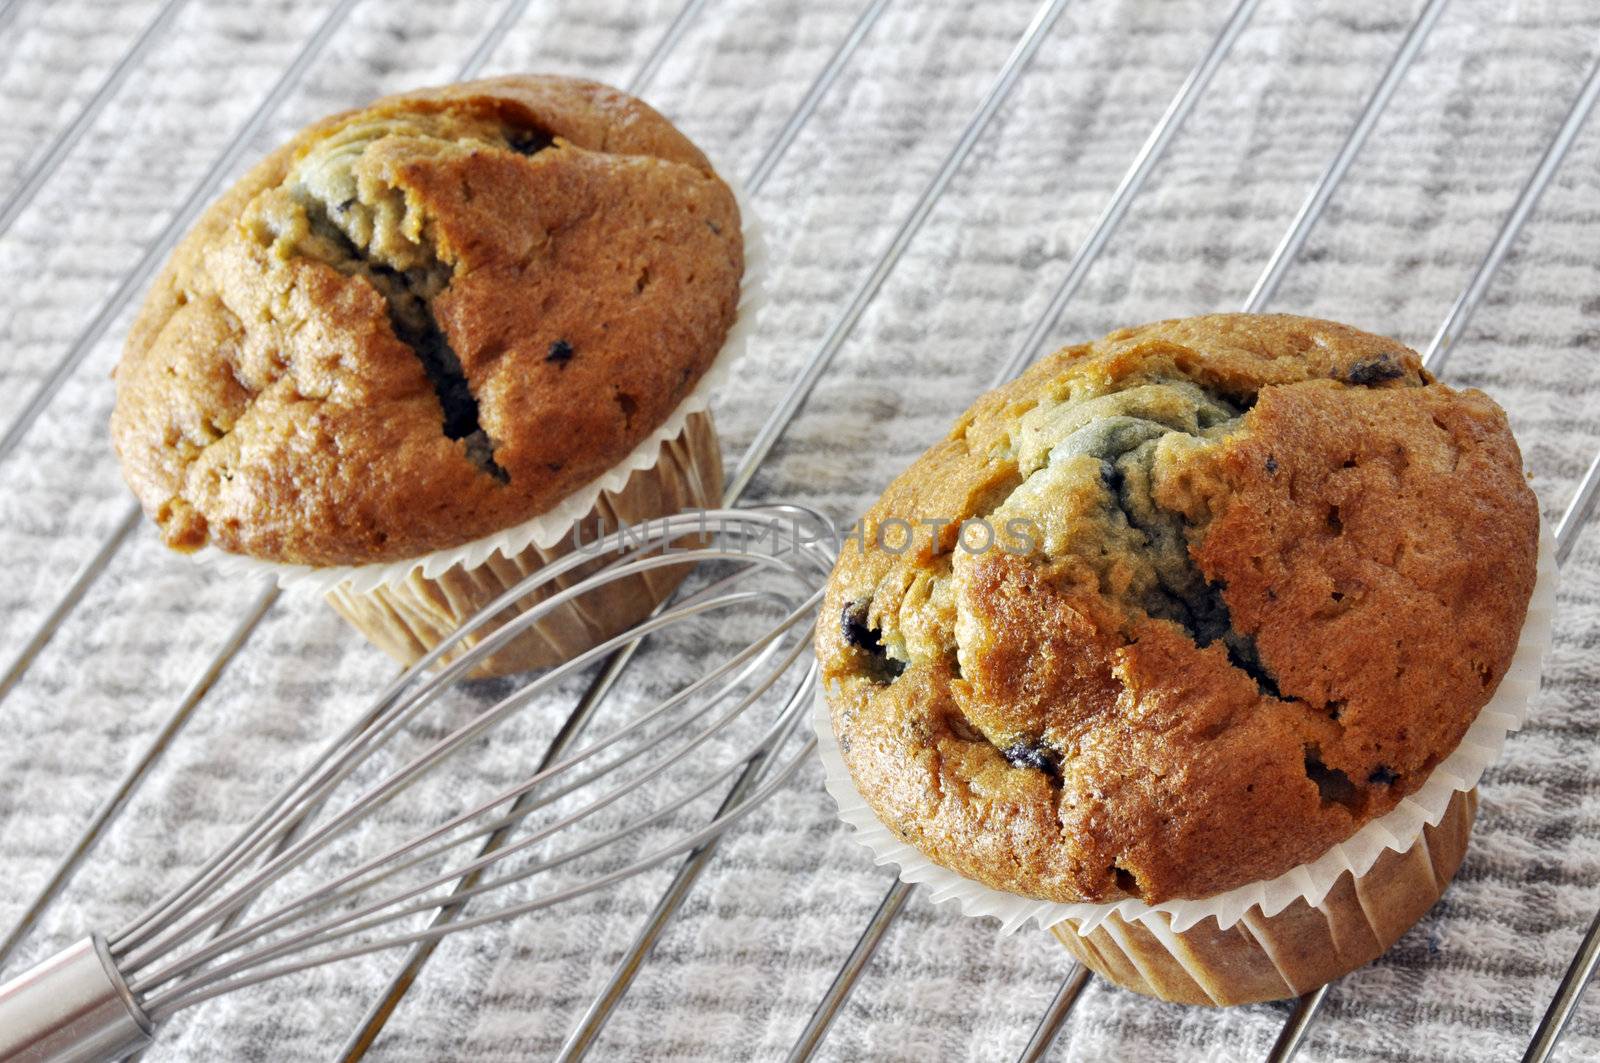 Two freshly baked blueberry muffins